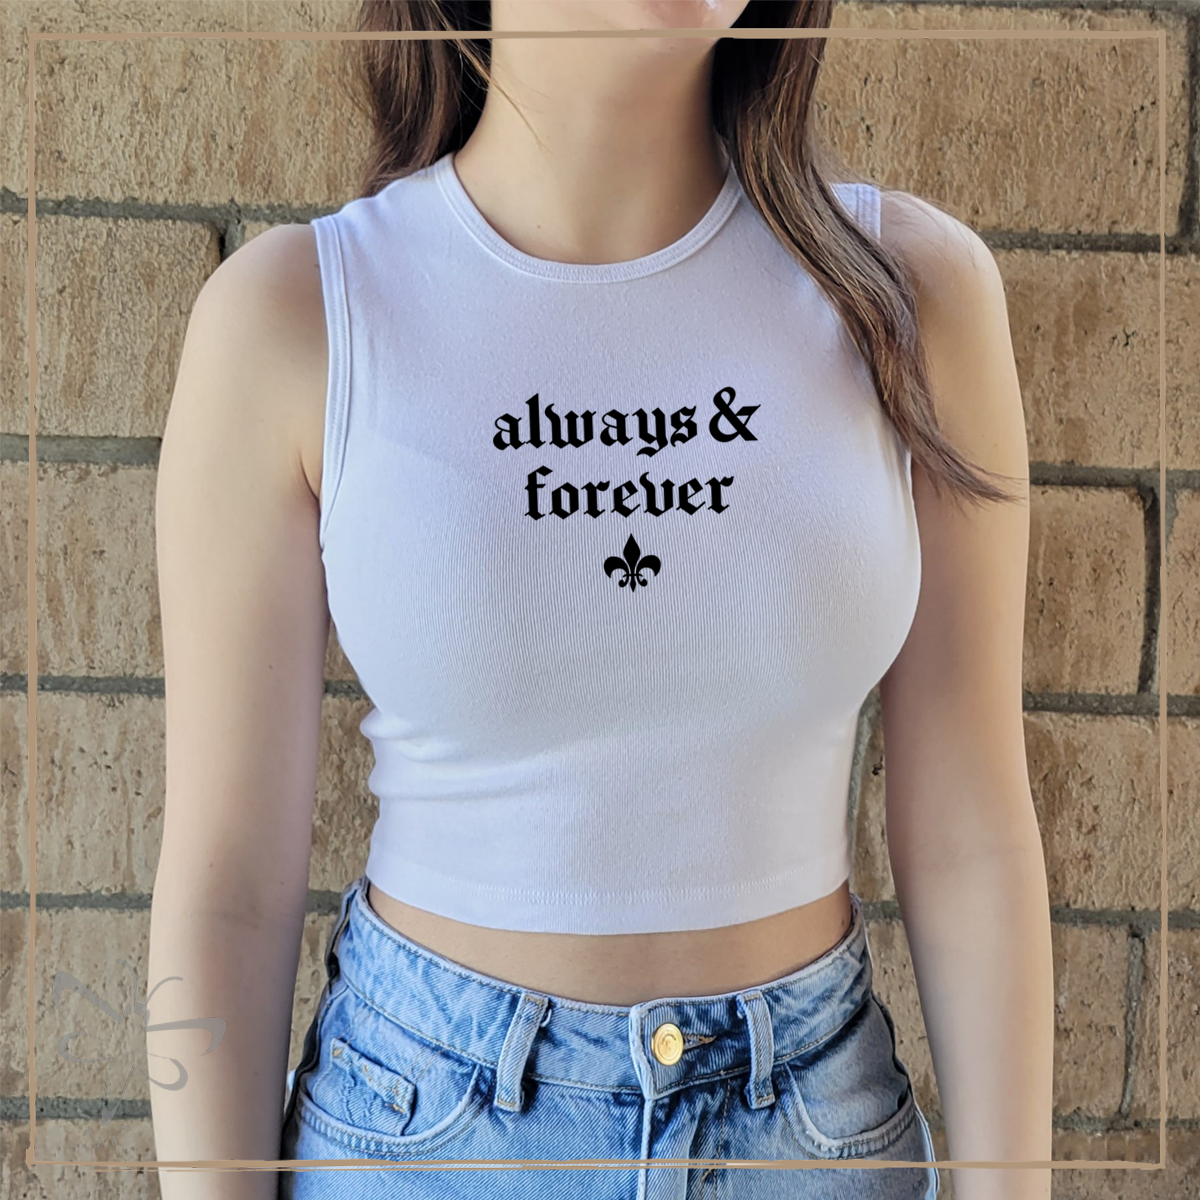 Always & Forever - Tank Top/Baby Tee S / White Top